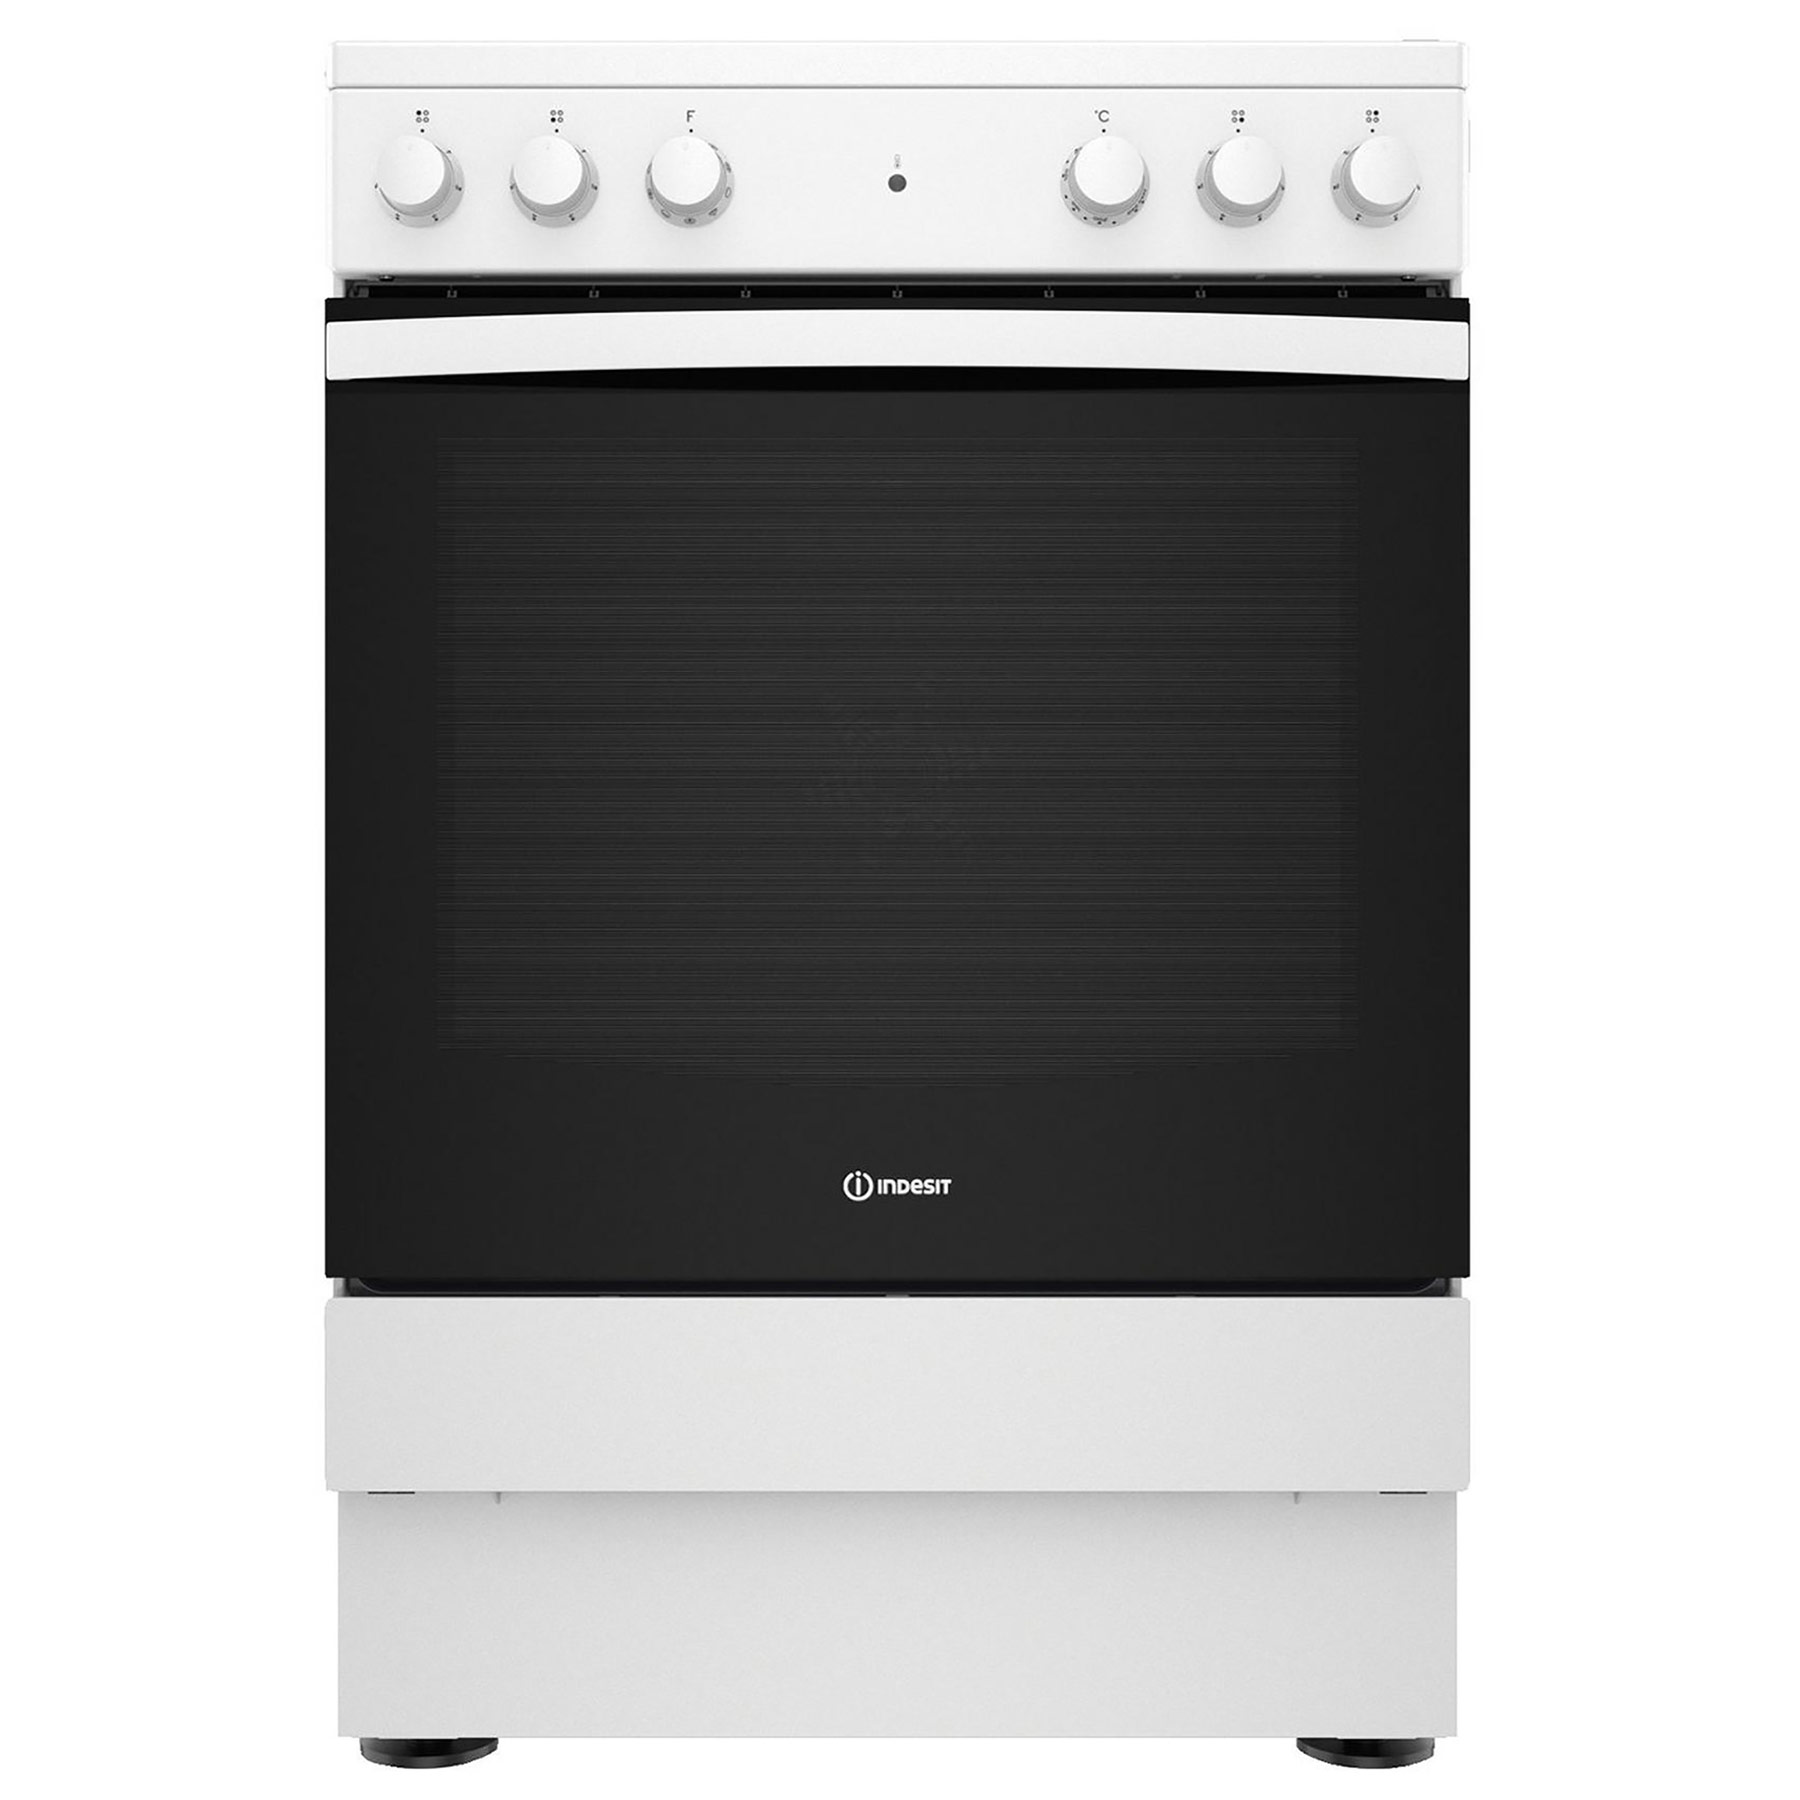 Image of Indesit IS67V5KHW 60cm Single Oven Electric Cooker in White Ceramic Ho